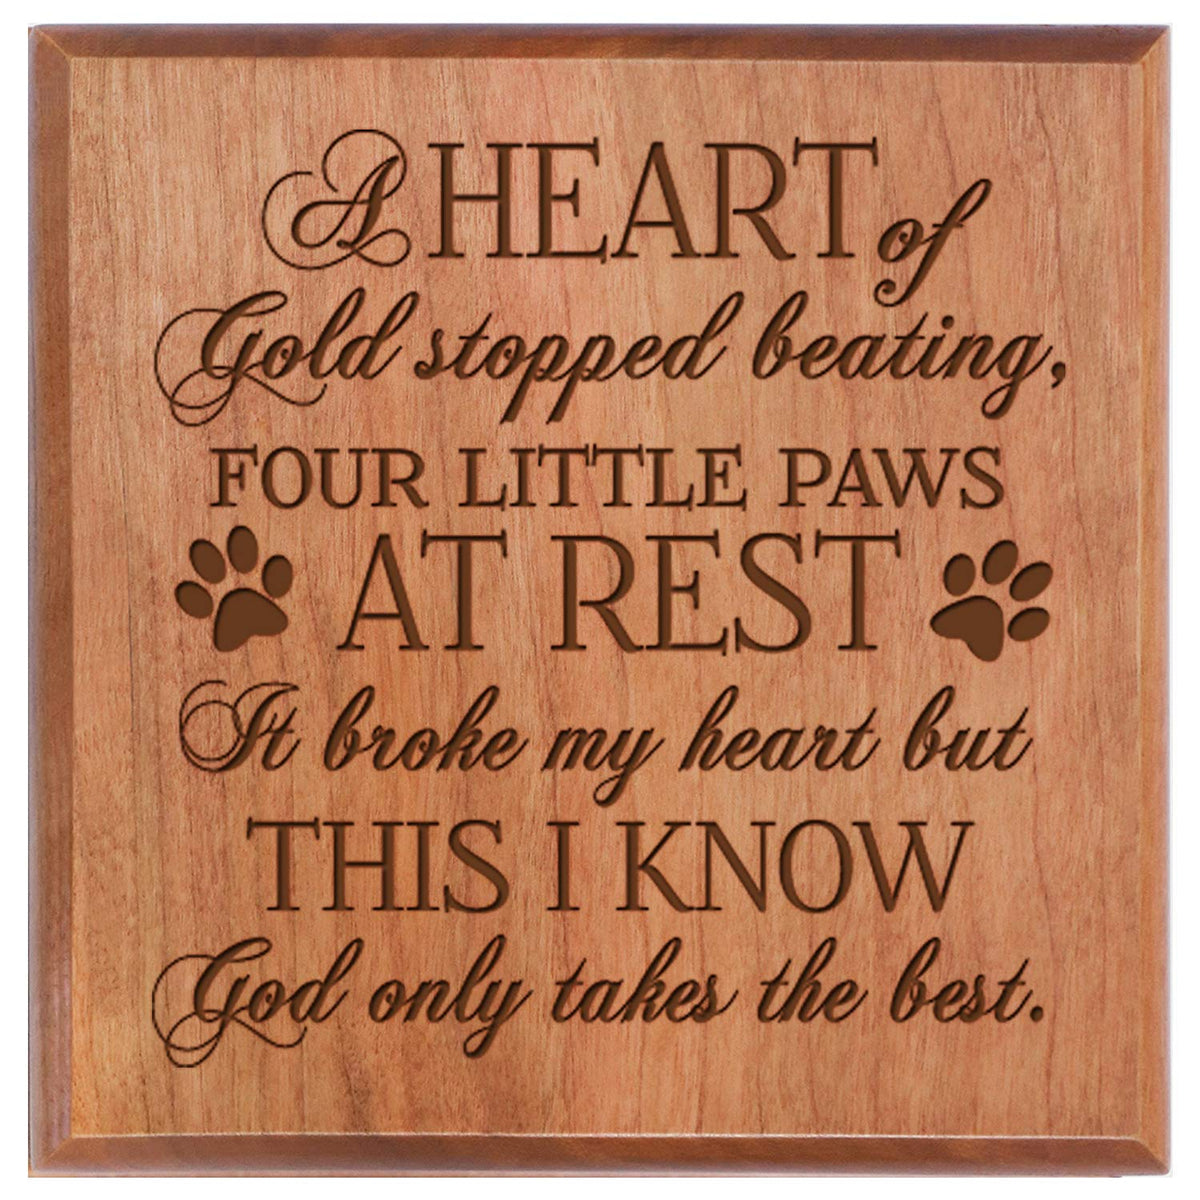 Custom Wooden Cremation Urn for Pet Ashes 5.5 x 5.5 Heart Of Gold - LifeSong Milestones